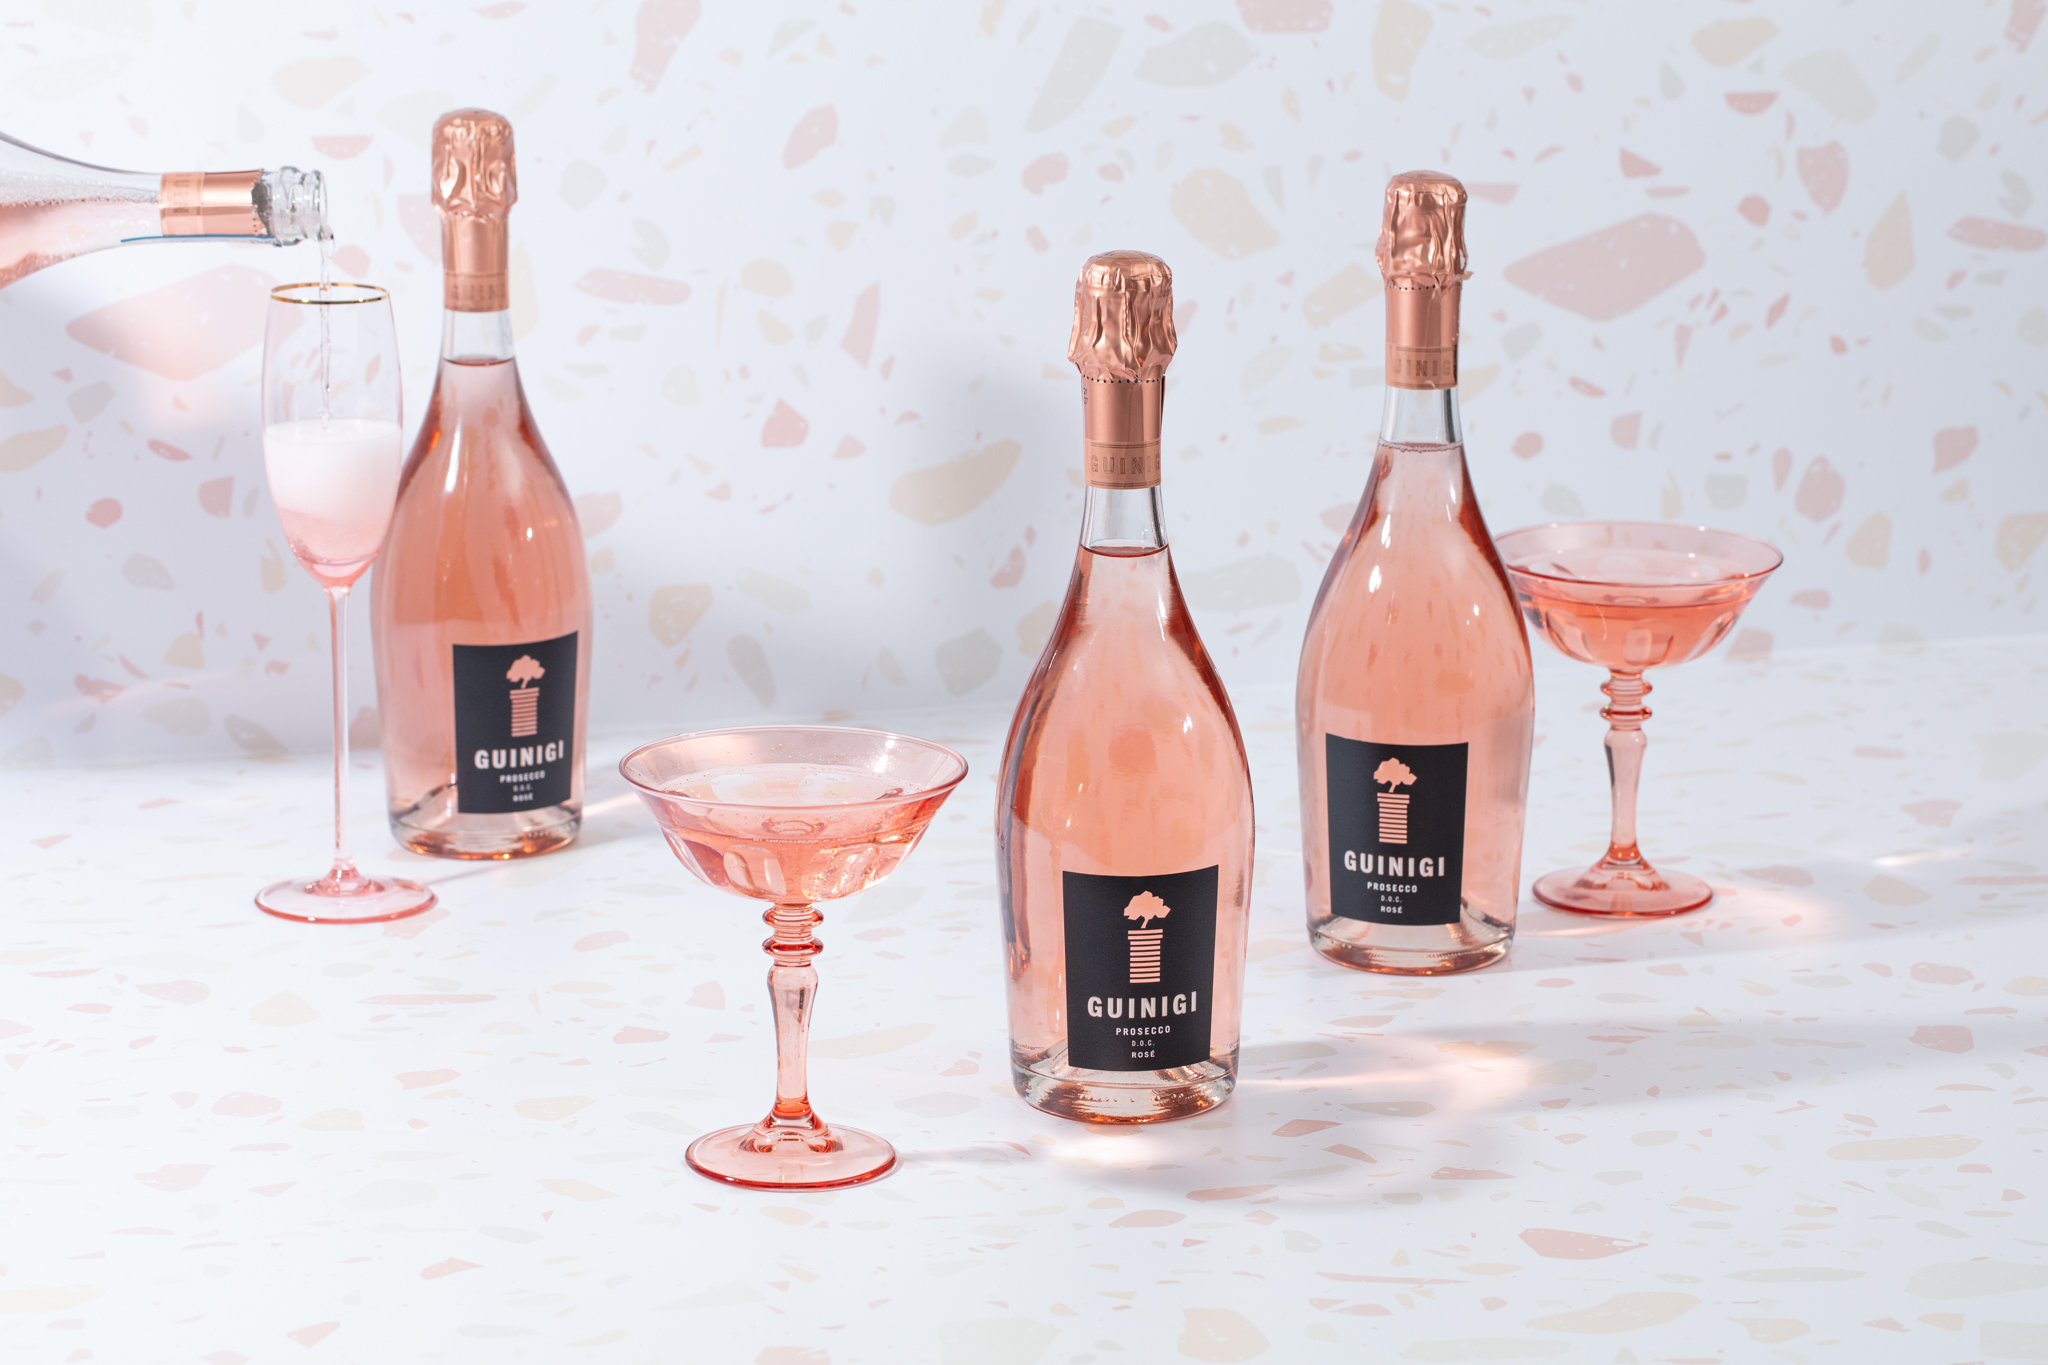 A bottle of the Guinigi Wines prosecco rose doc: Guinigi Wines debuts Prosecco Rosé D.O.C. in time for national Prosecco day